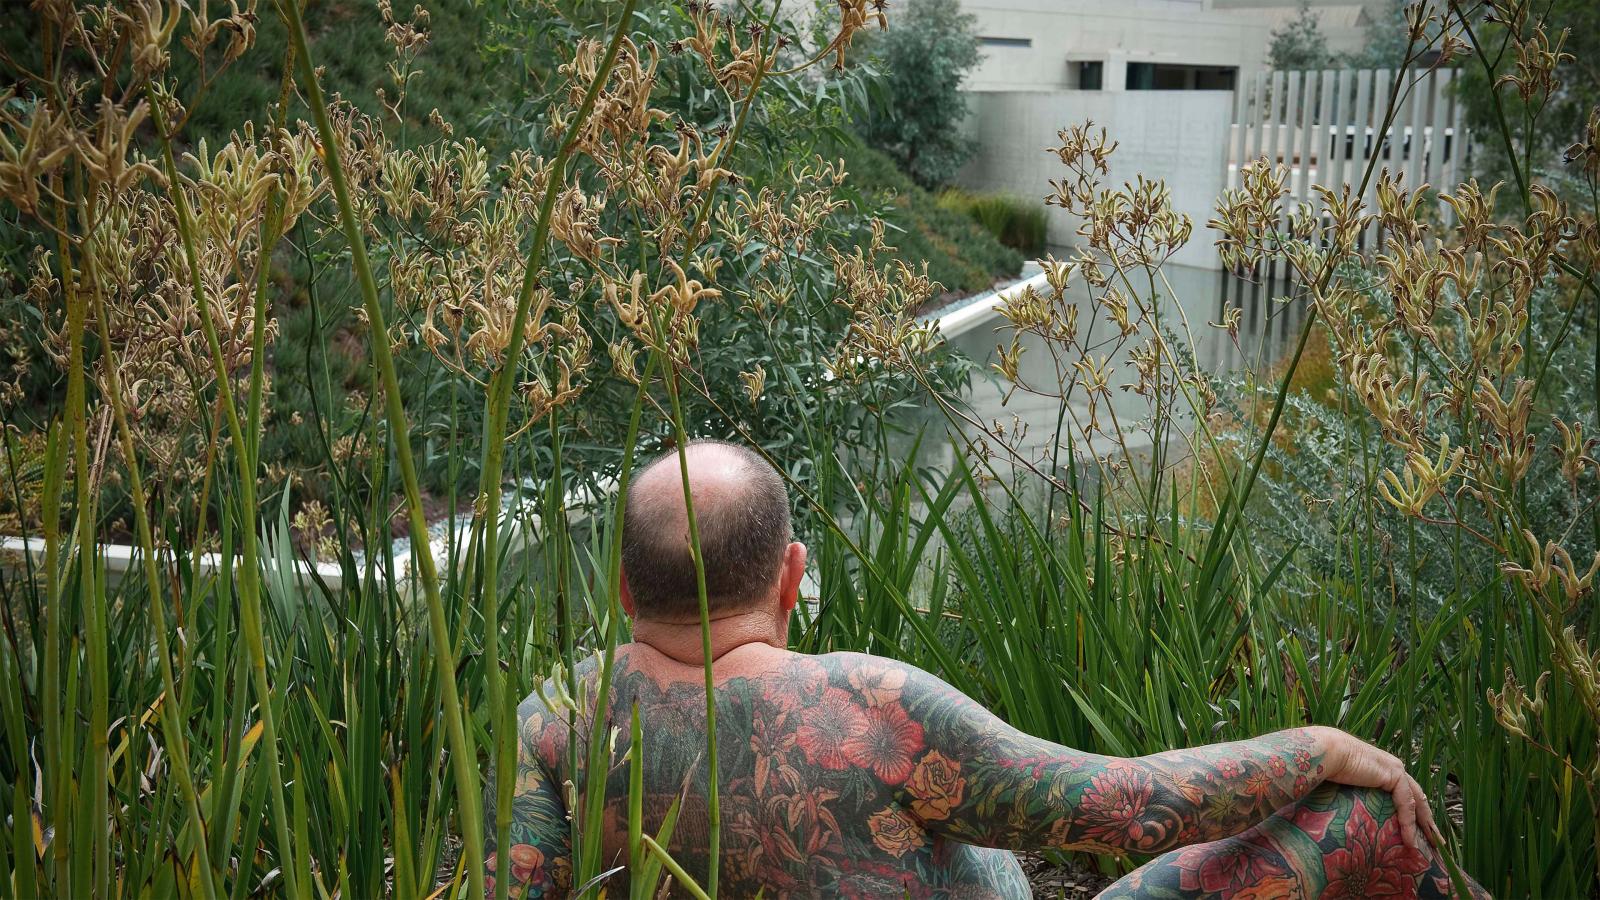 An Australian tattooed individual, seen from behind, lounges amidst the tall grasses and plants in a garden area. The intricate full-back tattoos prominently feature colorful floral designs. Urban architectural structures are visible in the background.